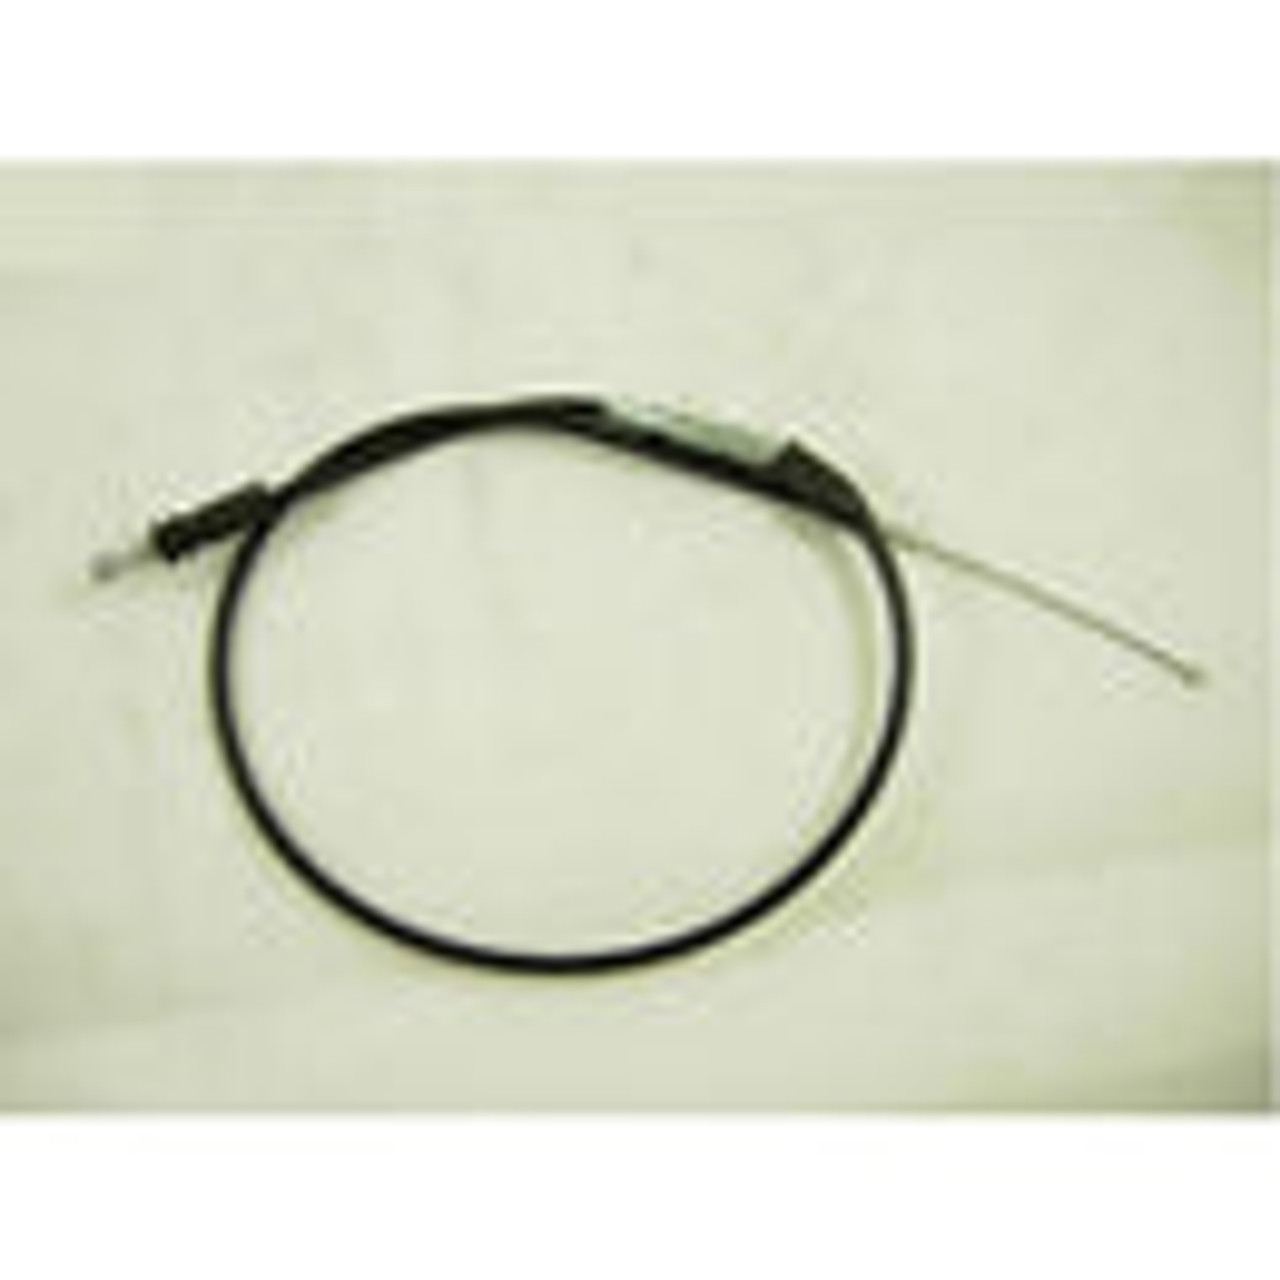 (11) Throttle Cable